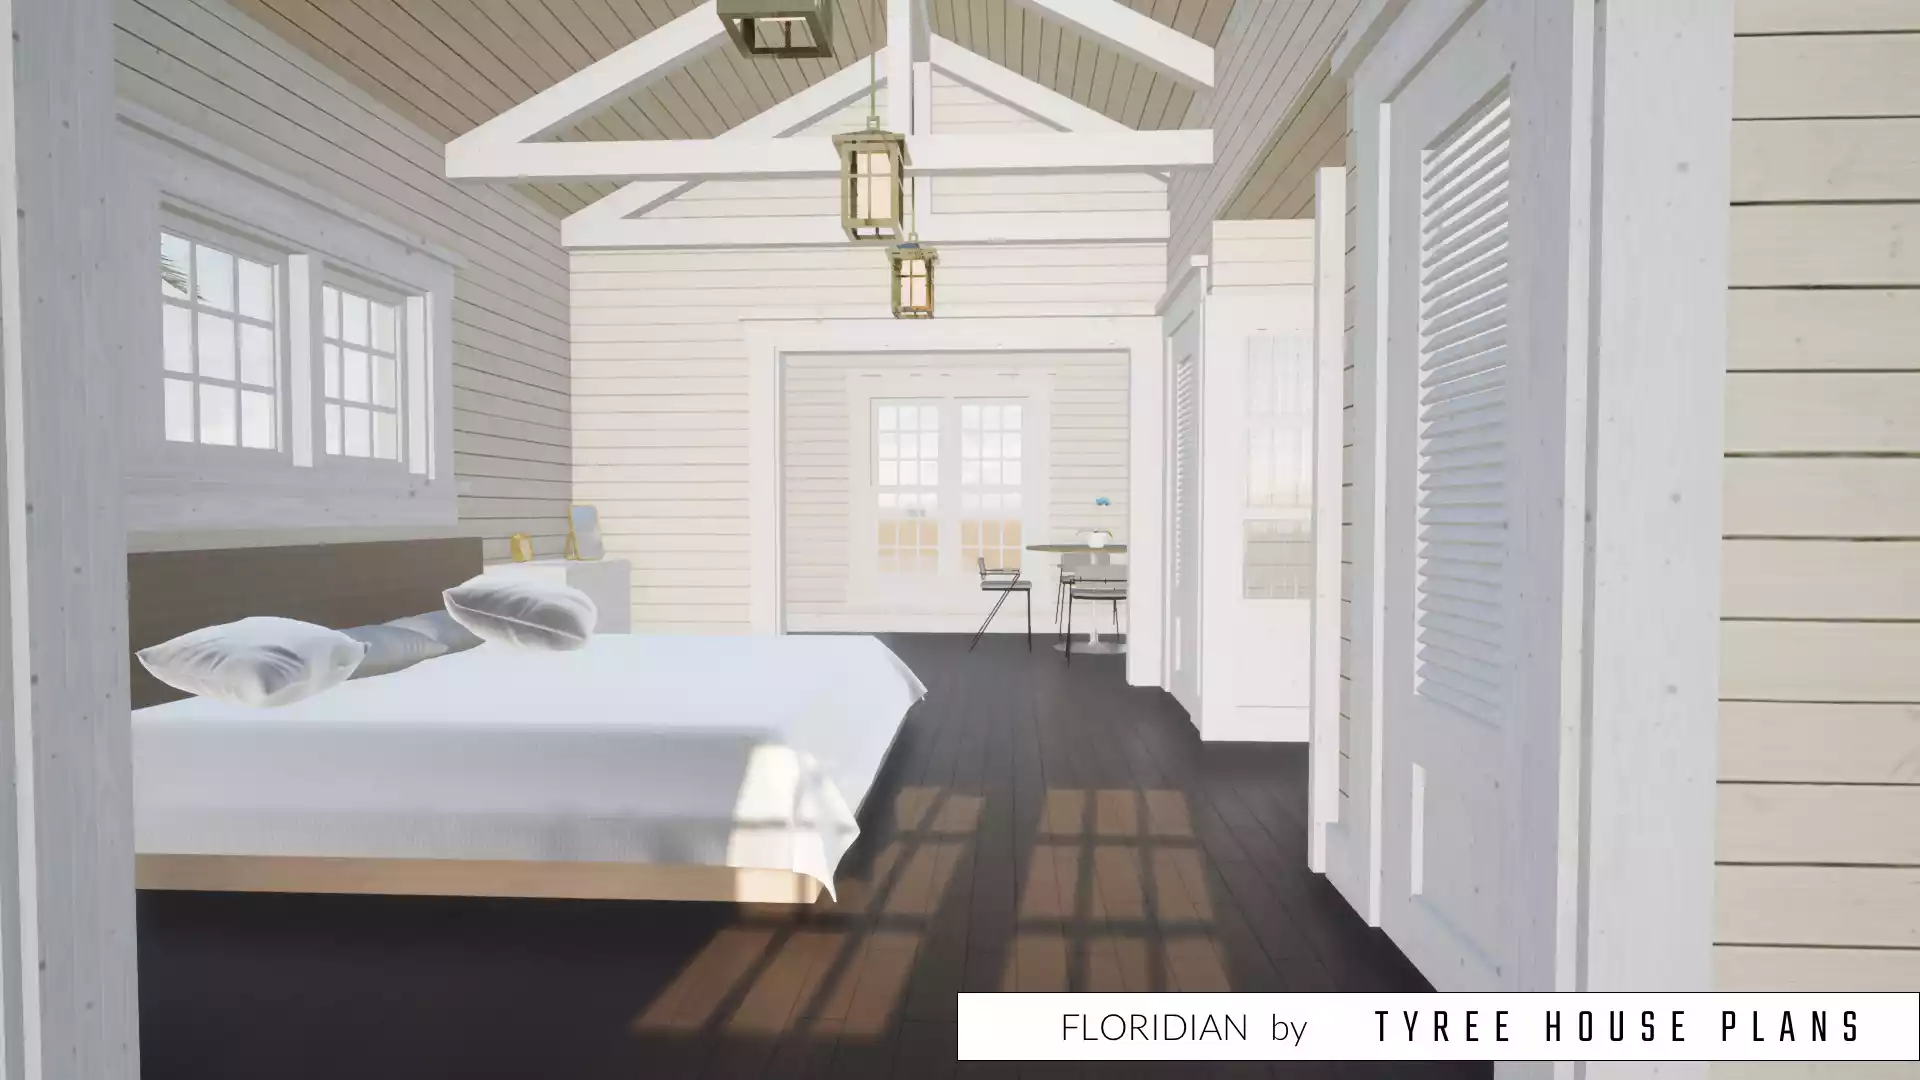 In the bedroom, looking toward the private dining and kitchen combination. Floridian by Tyree House Plans.